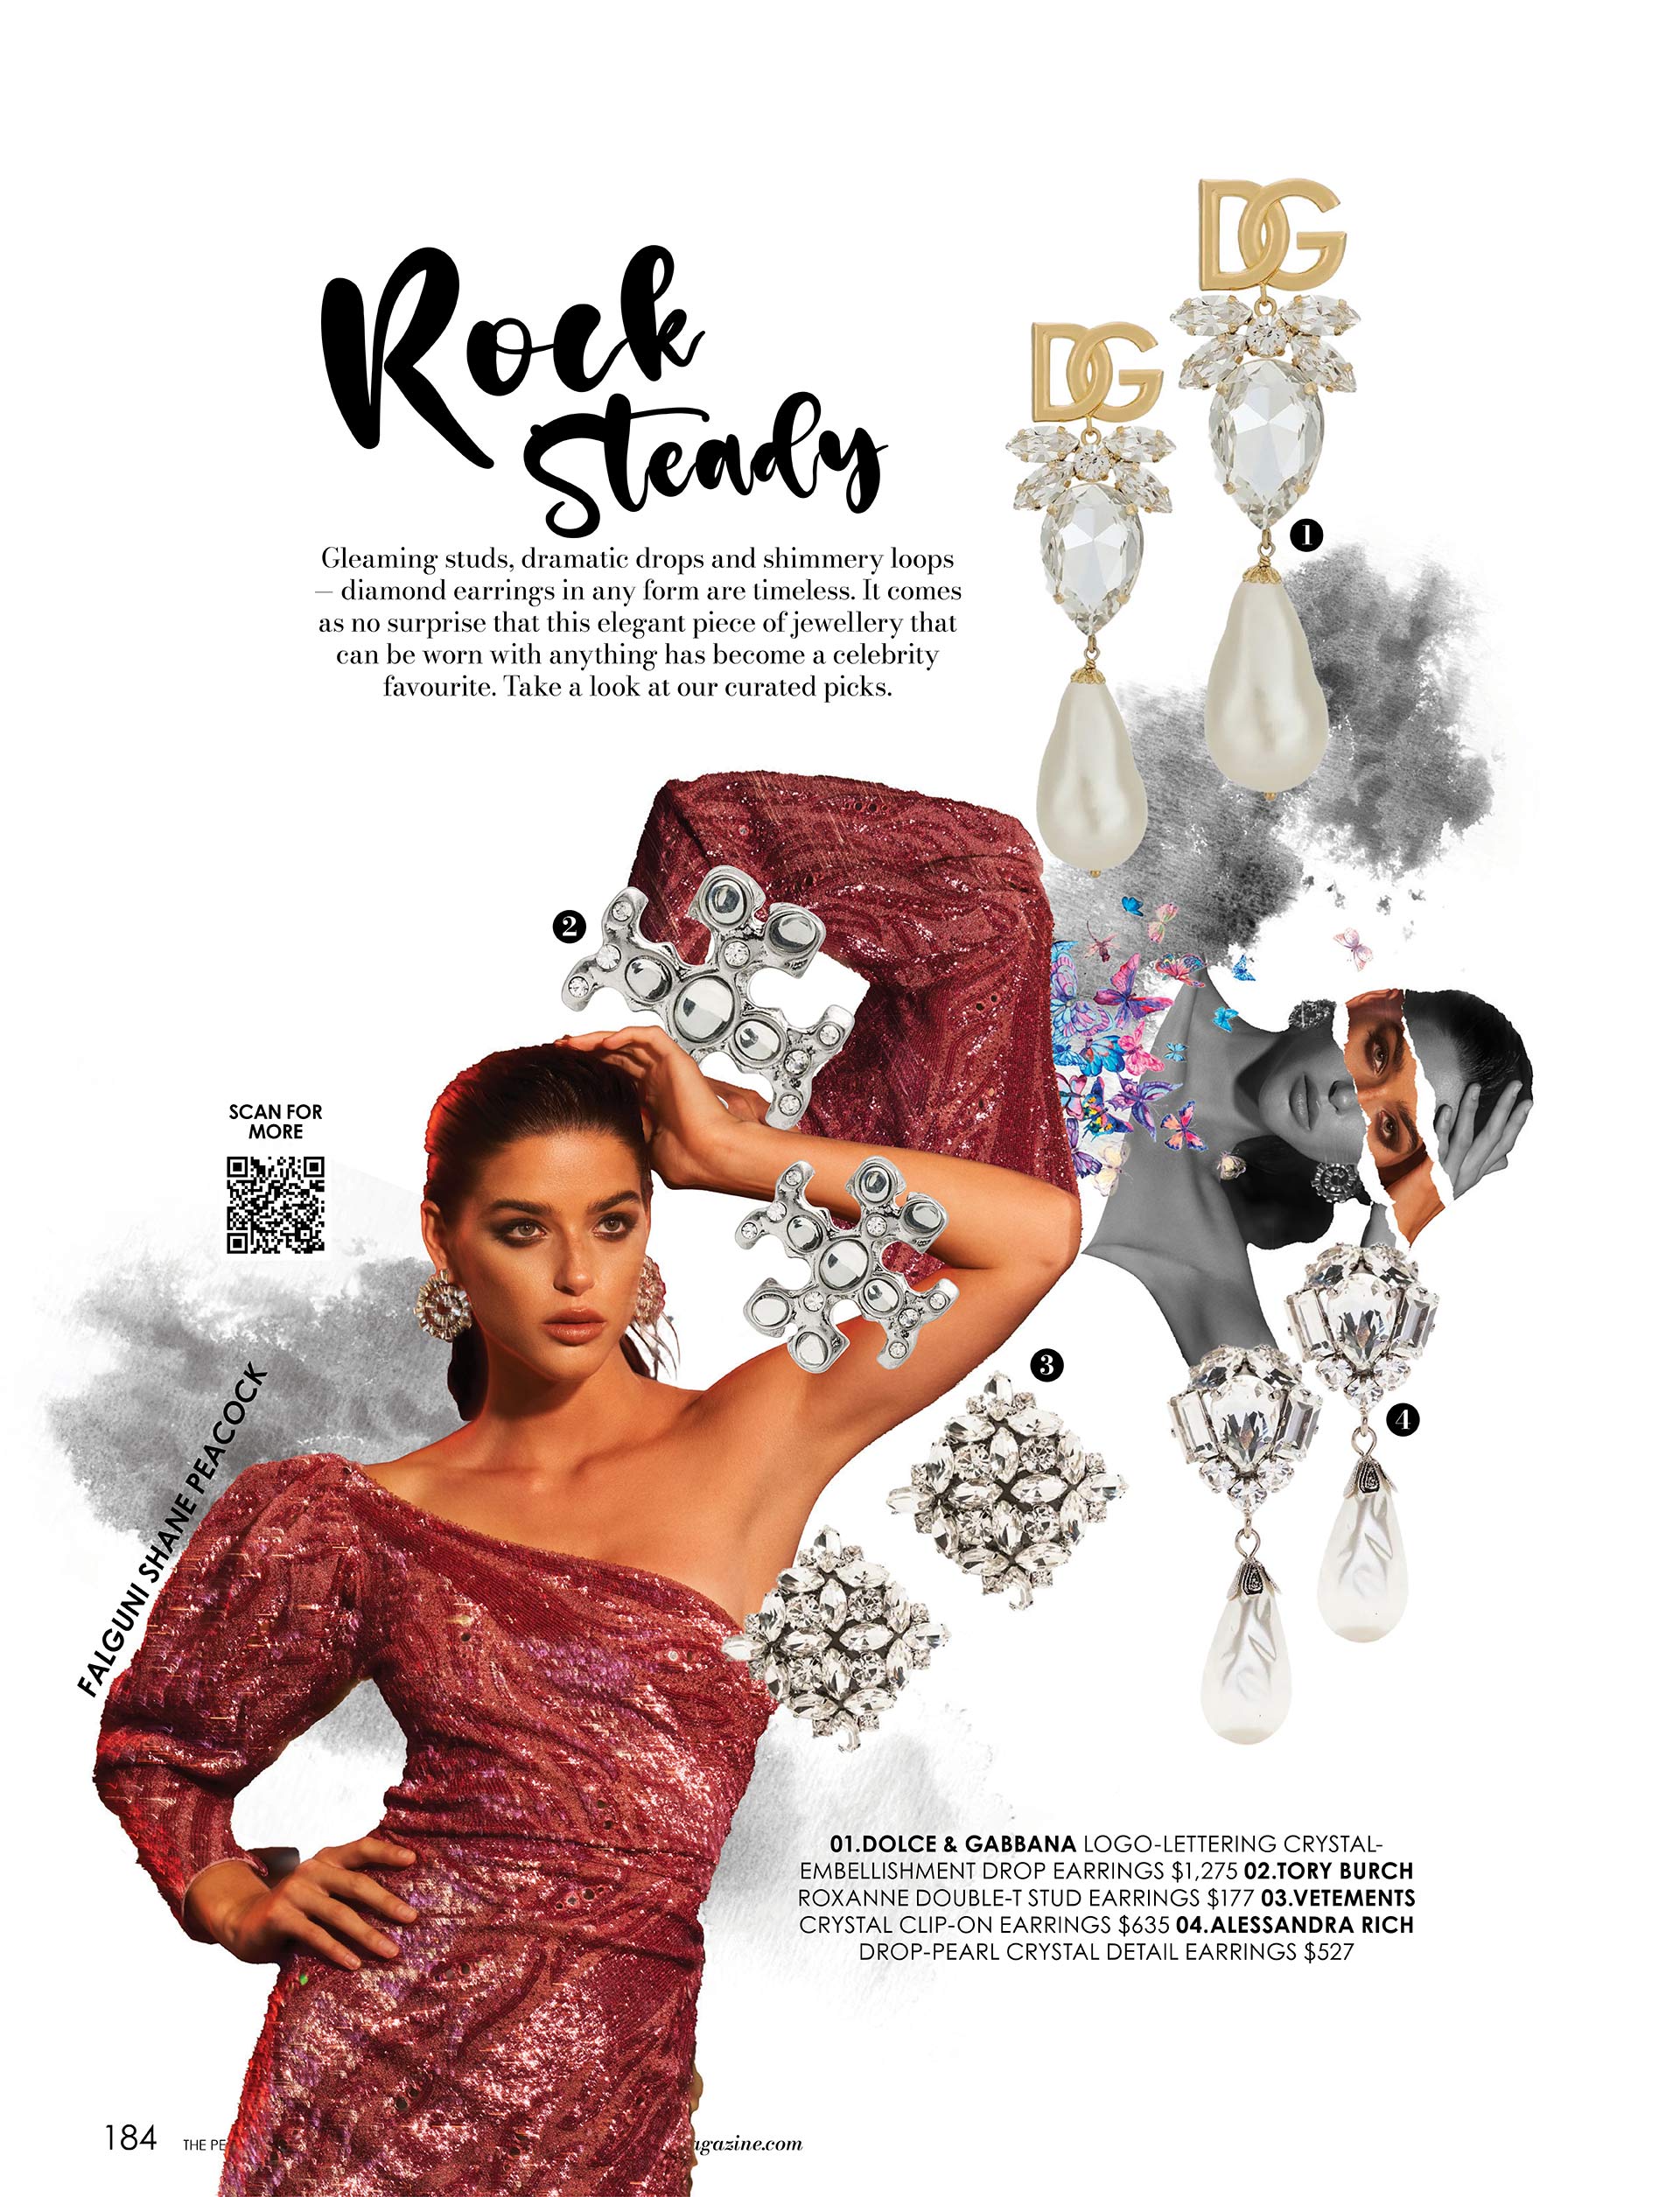 TORY BURCH ROXANNE DOUBLE-T STUD EARRINGS $177 Archives - The Peacock  Magazine